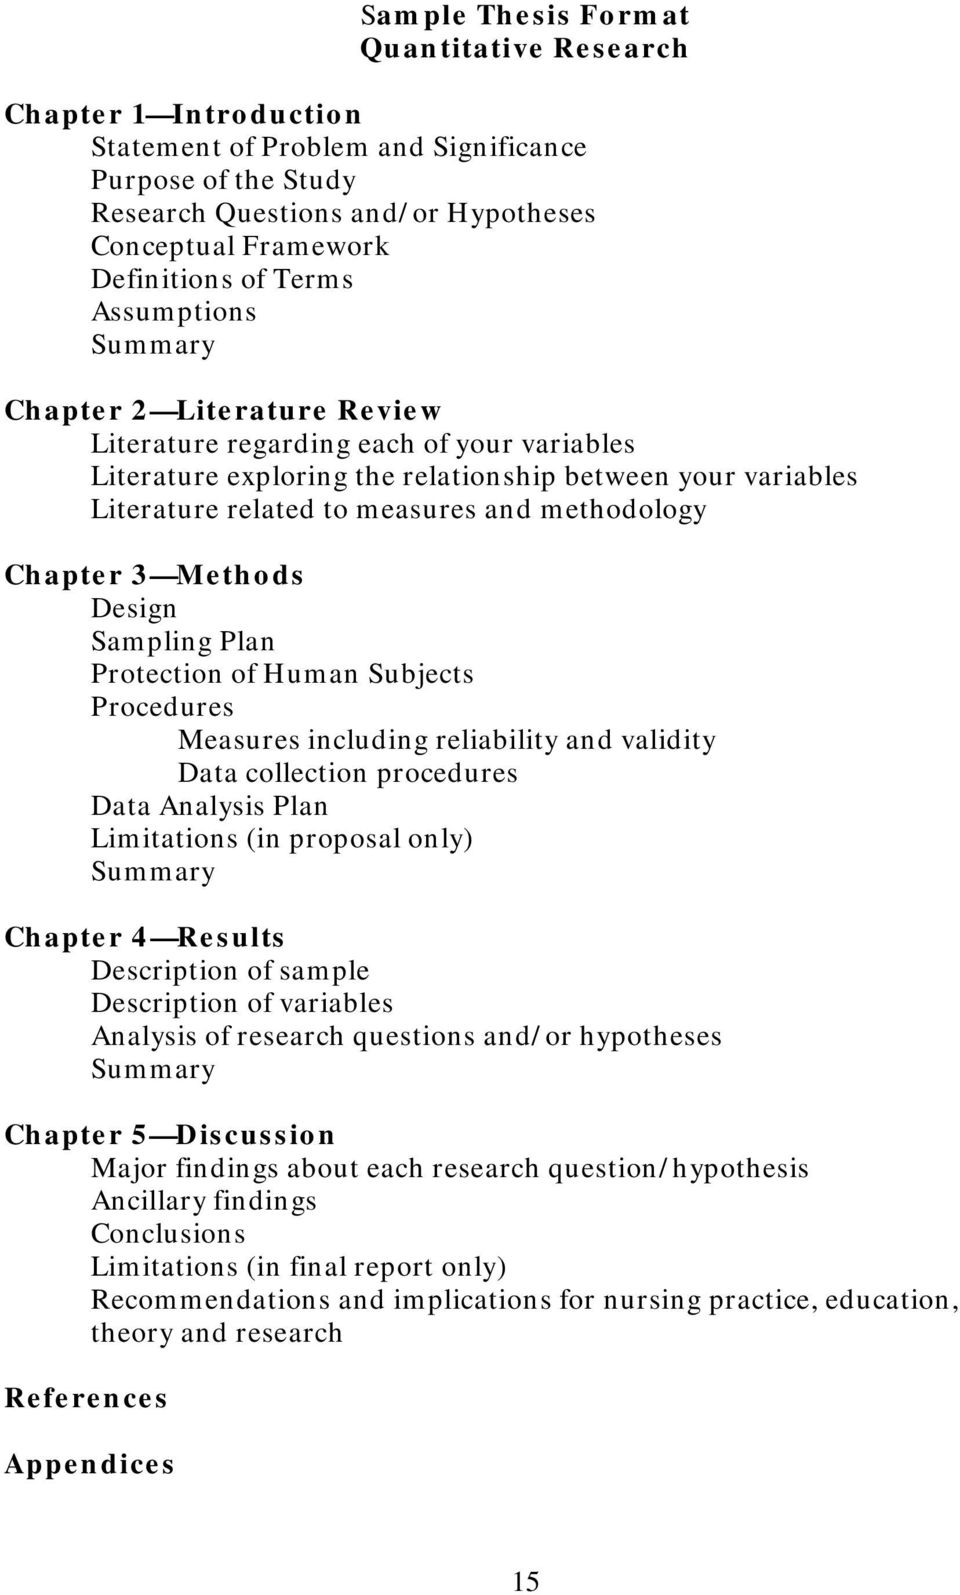 methodology Chapter 3 Methods Design Sampling Plan Protection of Human Subjects Procedures Measures including reliability and validity Data collection procedures Data Analysis Plan Limitations (in